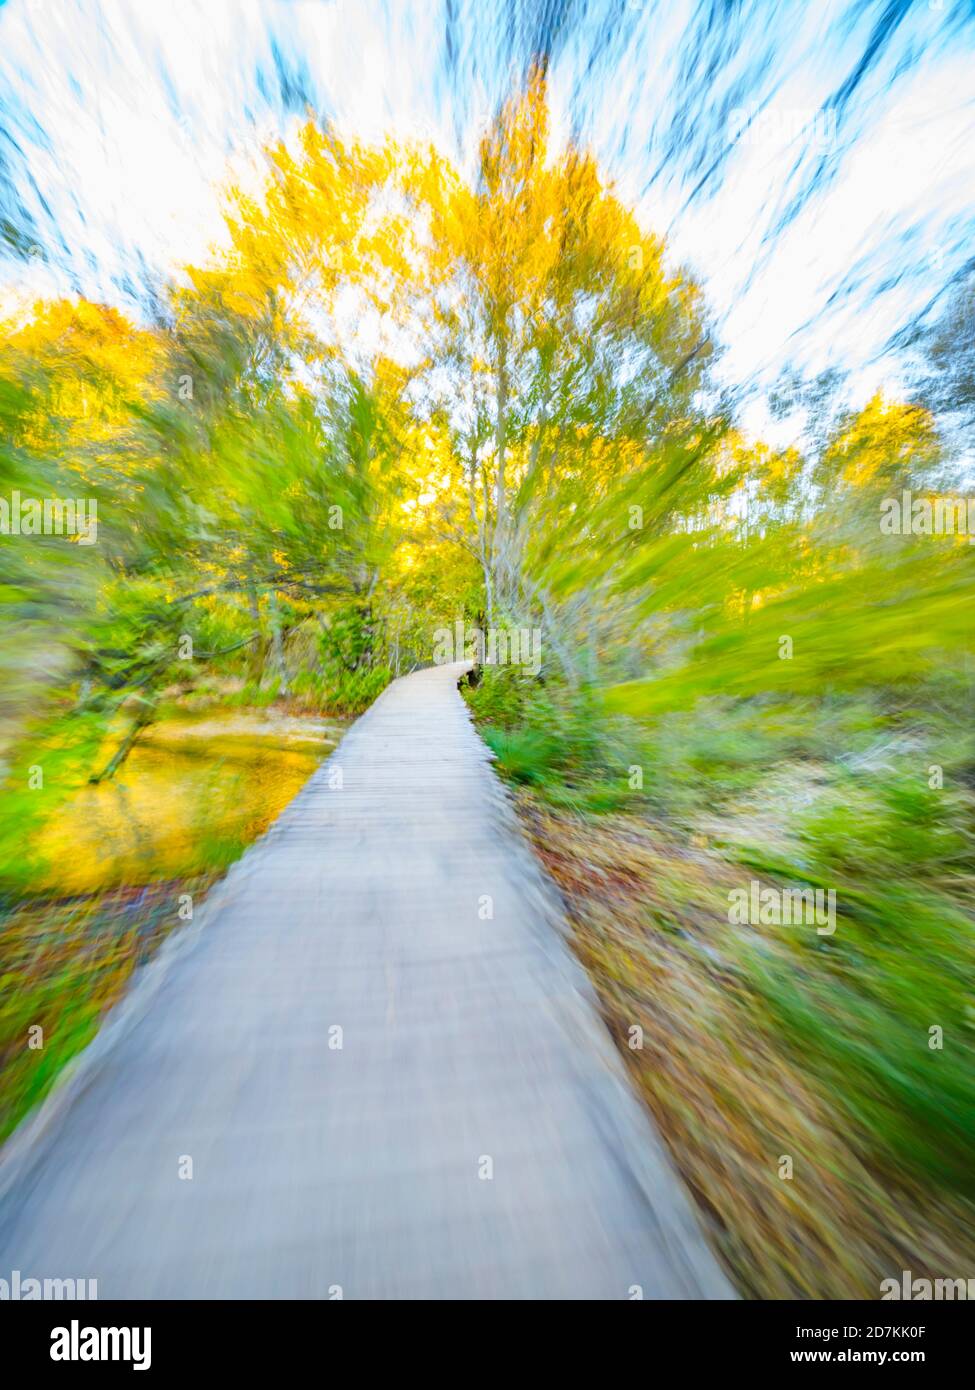 Wooden trail path pathway Plitvice lakes in Croatia Europe artistic arty creative intentionally blurry scenery portraying frenzy and speed Stock Photo